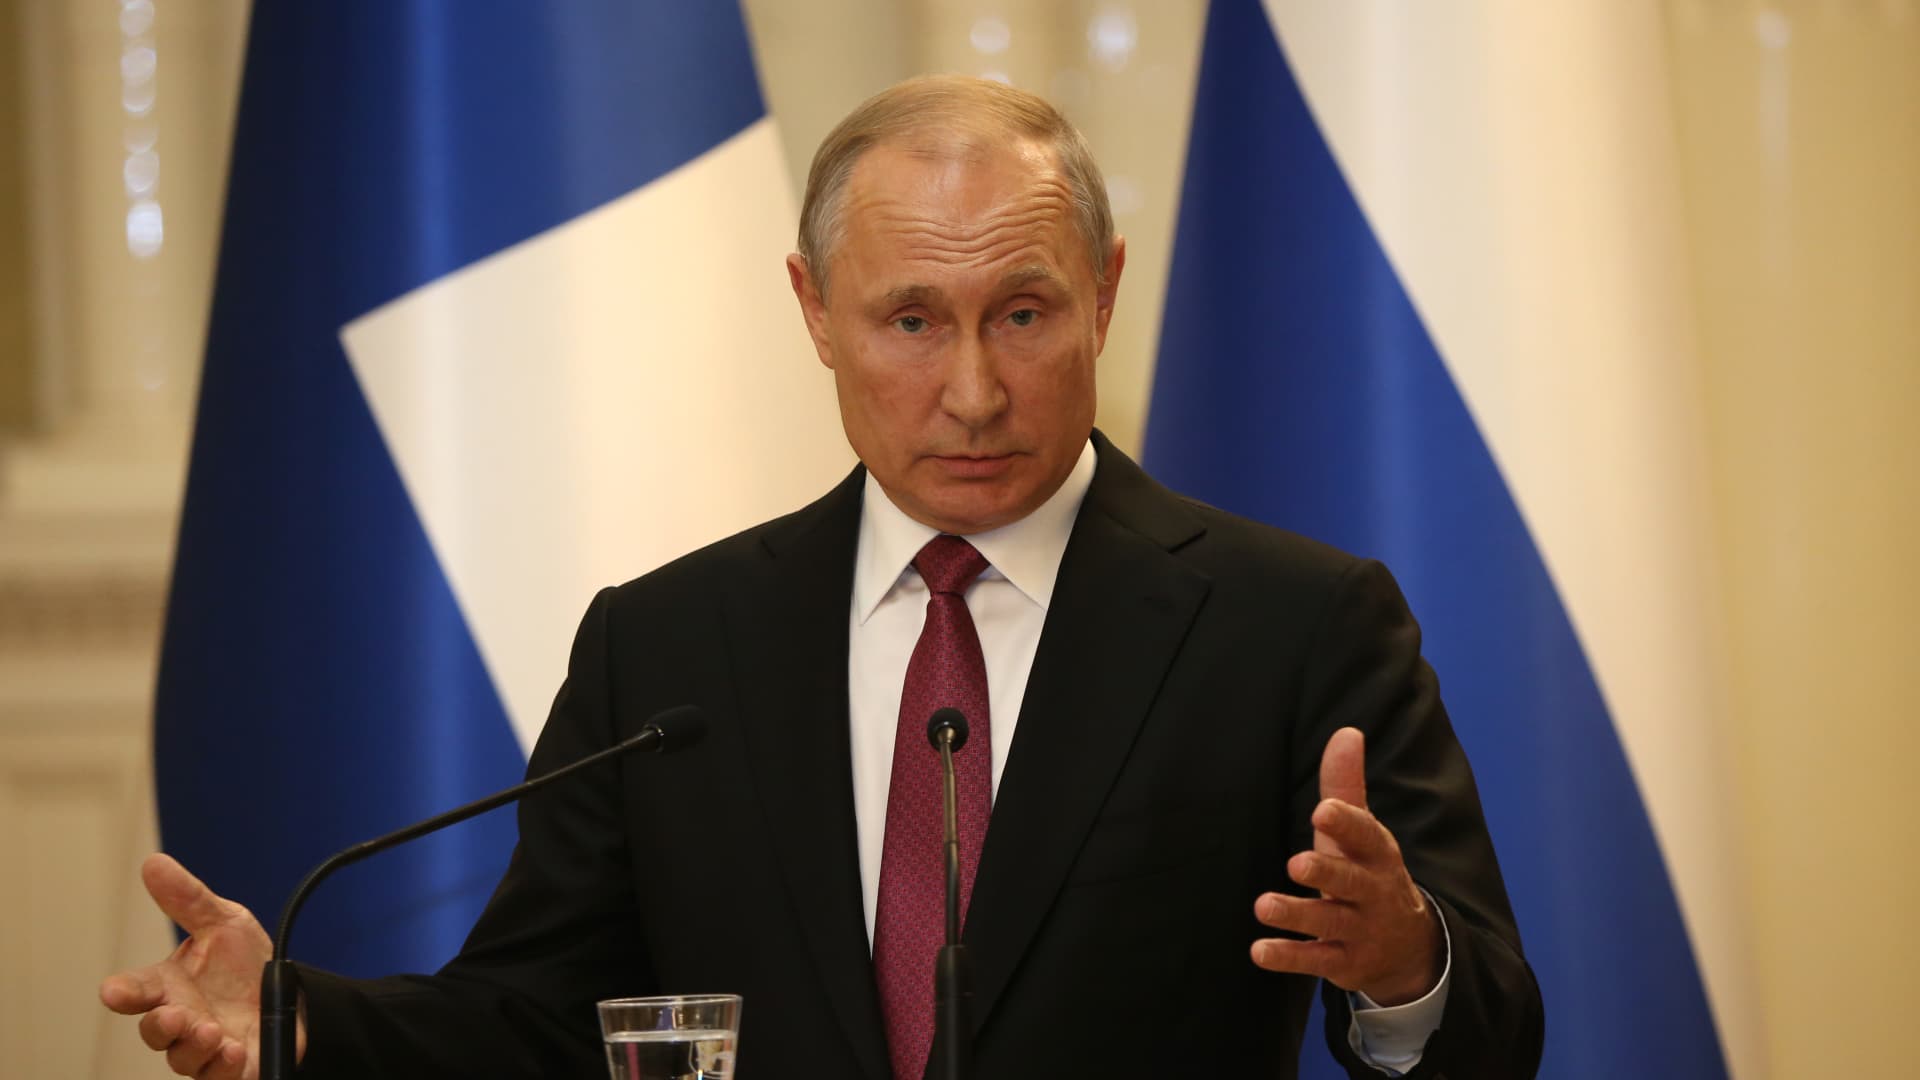 Russian President Vladimir Putin delivers a speech as he meets Finland's President Sauli Niinisto on August 21, 2019 in Helsinki, Finland. Russian President Putin is on a one-day visit to Finland.